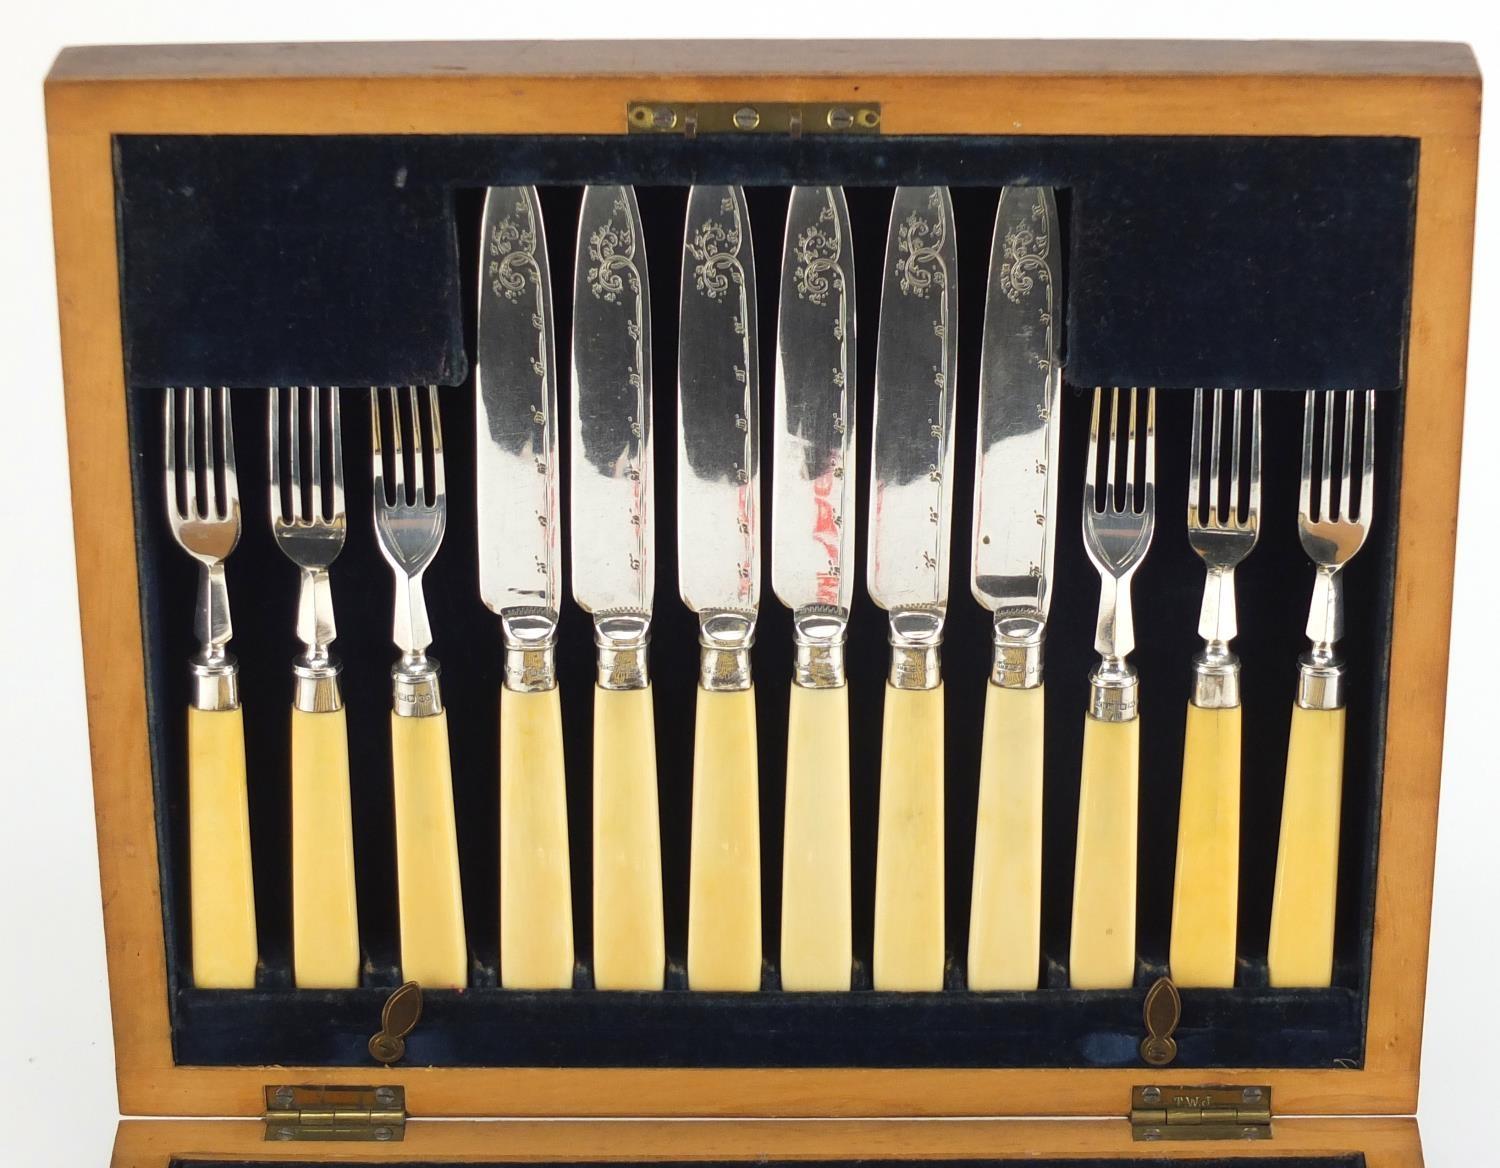 Mahogany six place canteen of silver plated fish knives and forks, with ivory handles and silver - Image 2 of 5